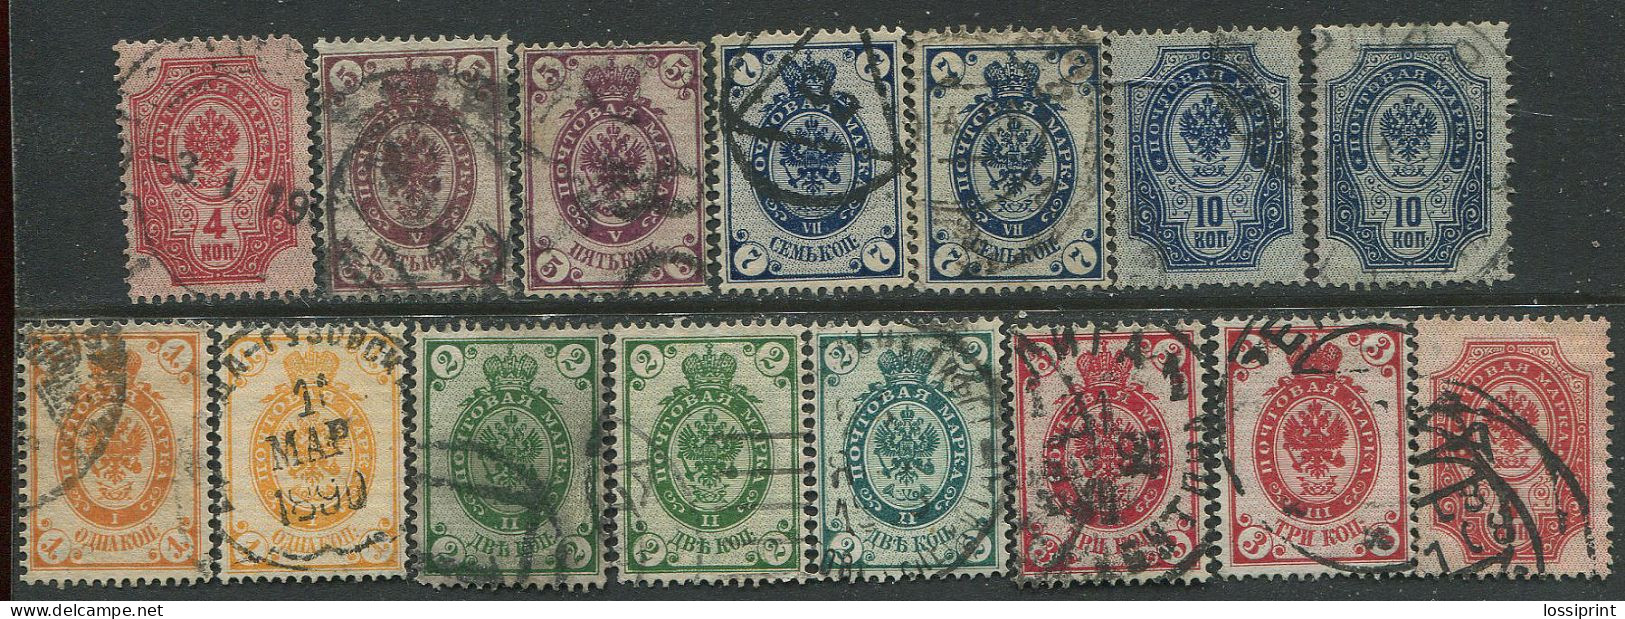 Russia:Used Stamps Coat Of Arms, Pre 1904, Different Papers - Used Stamps